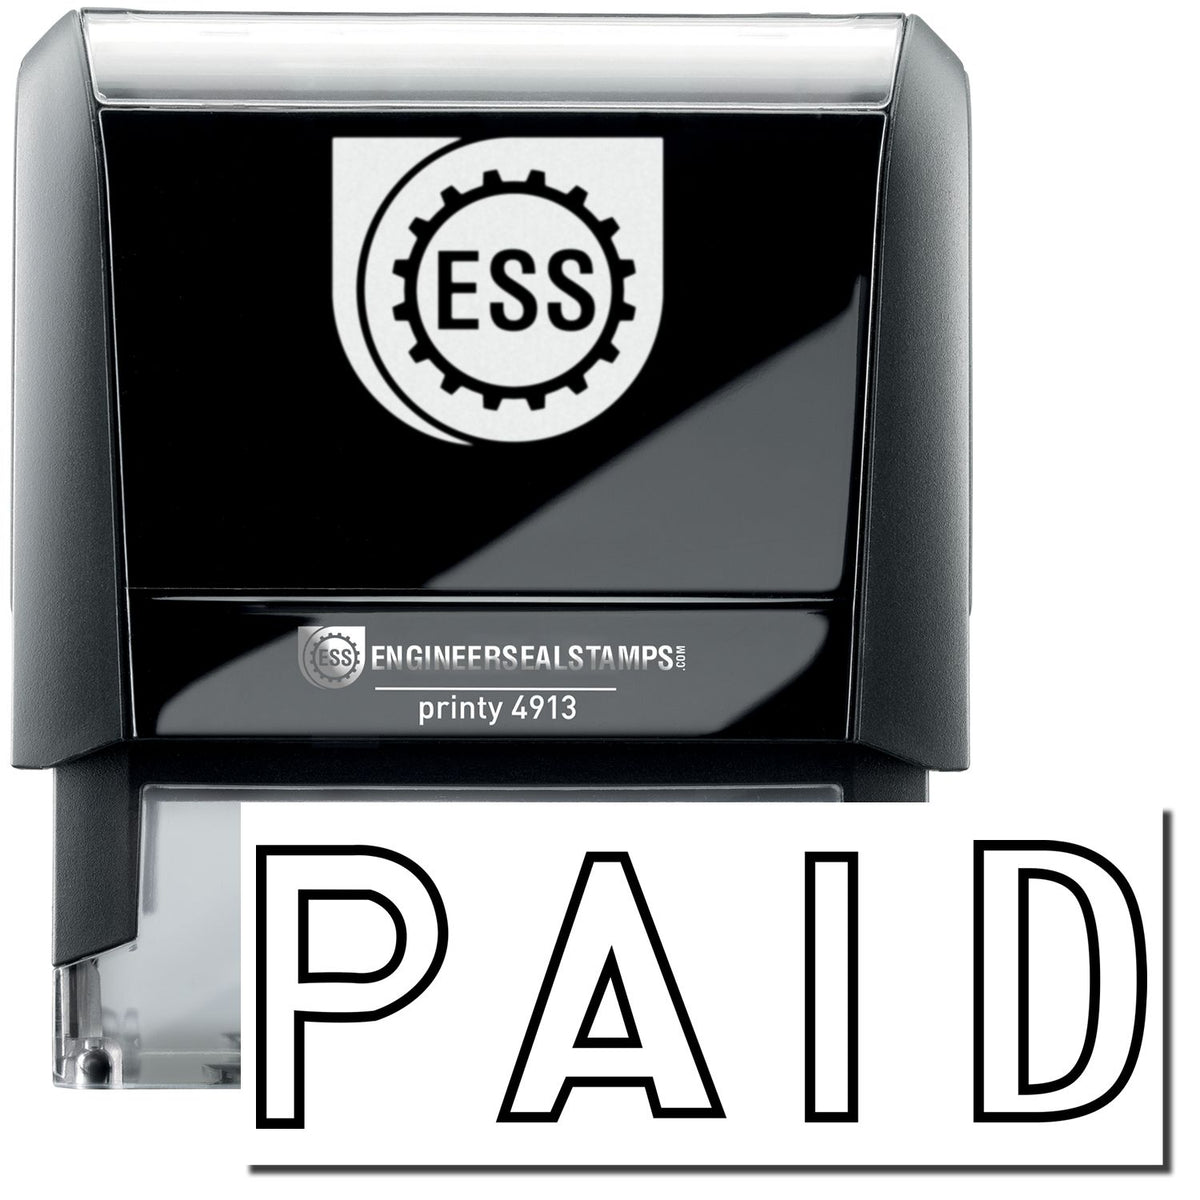 A self-inking stamp with a stamped image showing how the text &quot;PAID&quot; in a large outline font is displayed by it after stamping.